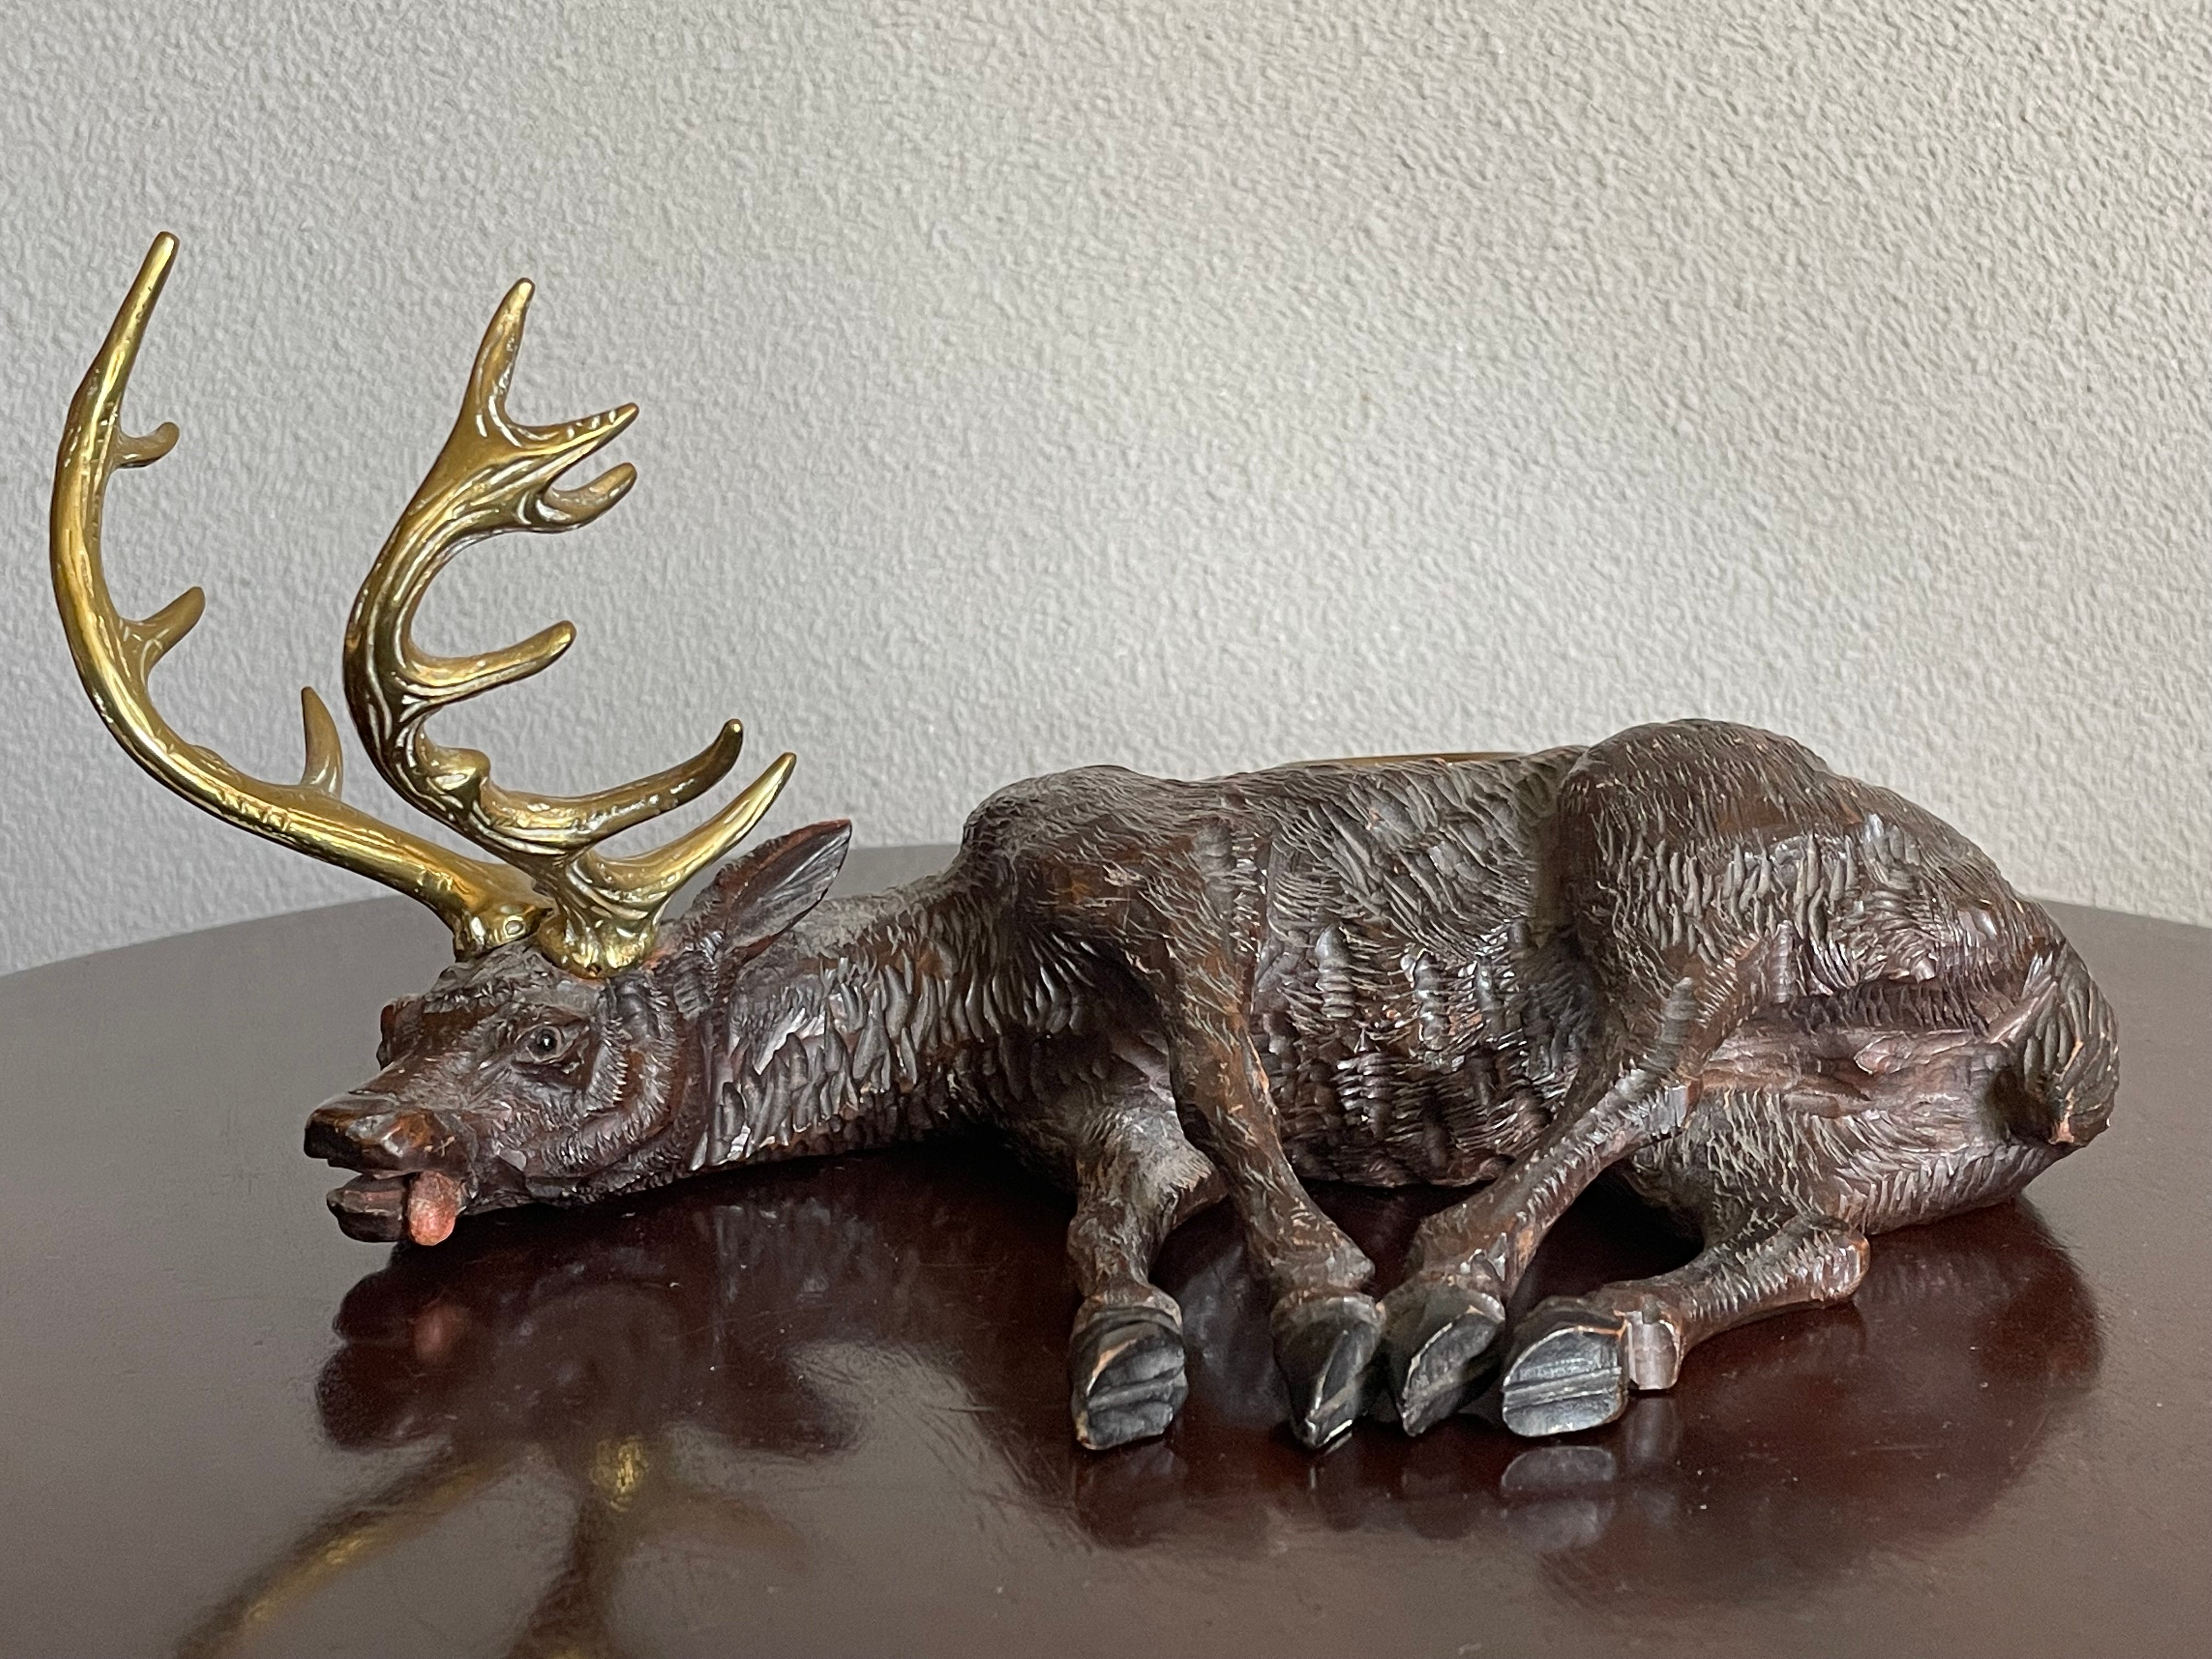 Finest quality carved and very good condition Swiss black forest stag / deer sculpture.

For the collectors of the rarest and best quality Black Forest sculptures we also have this very detailed, hand-carved stag. Looking at the intricate details